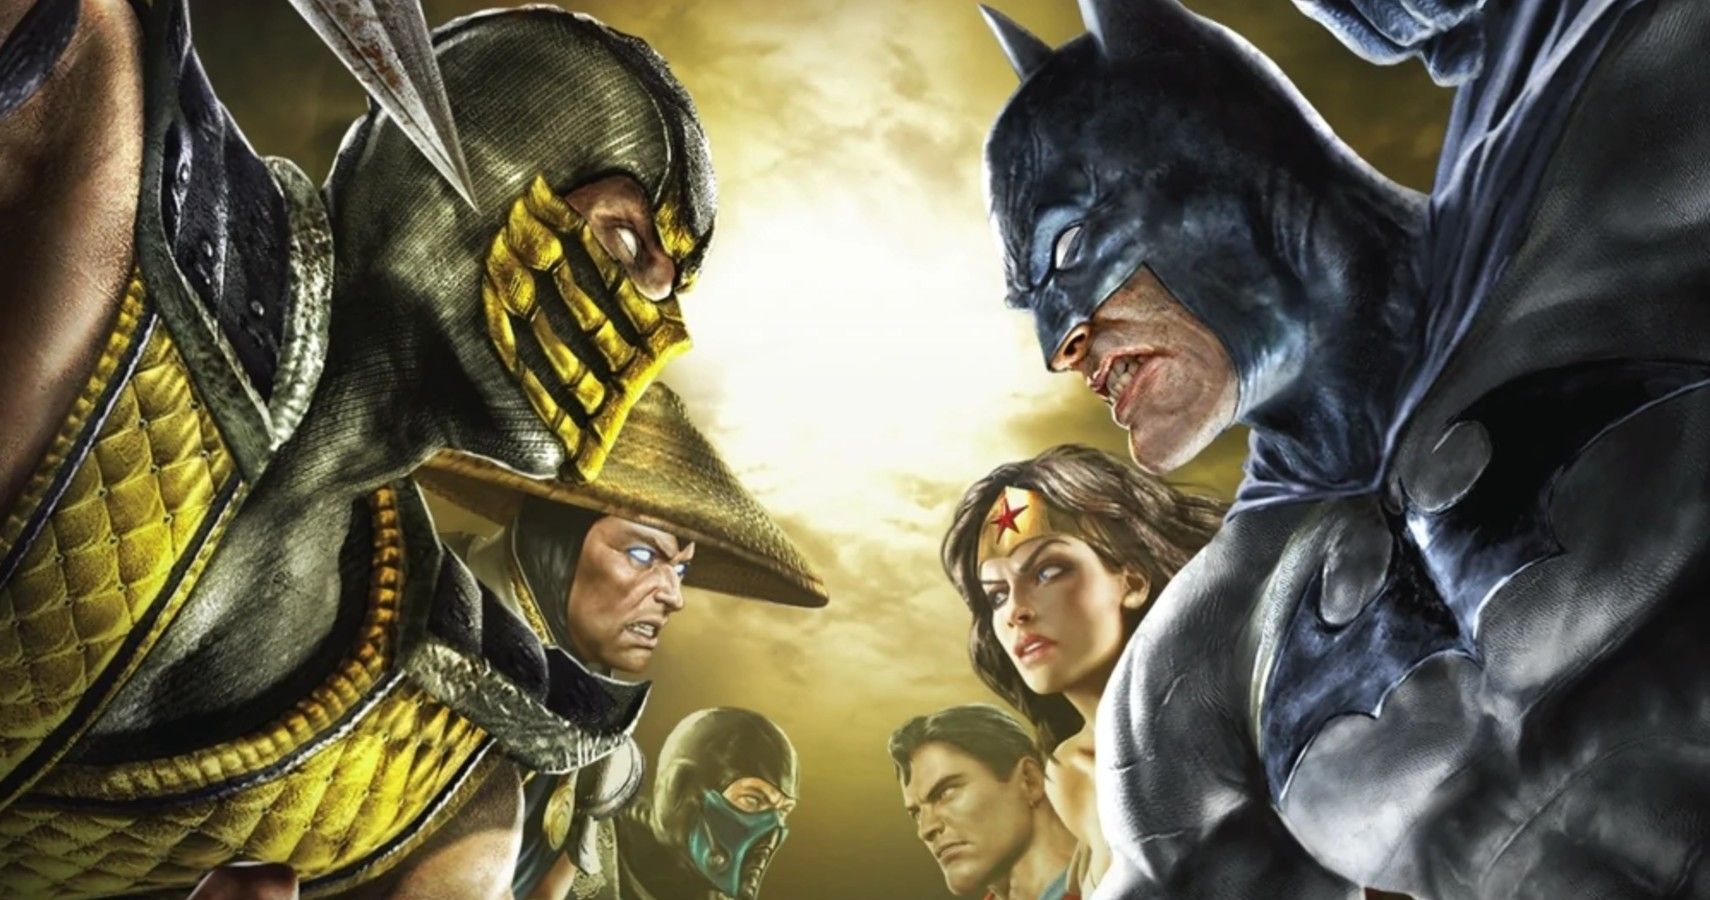 How successful in the meta were the three Mortal Kombat characters during  the crossovers into the Injustice series?